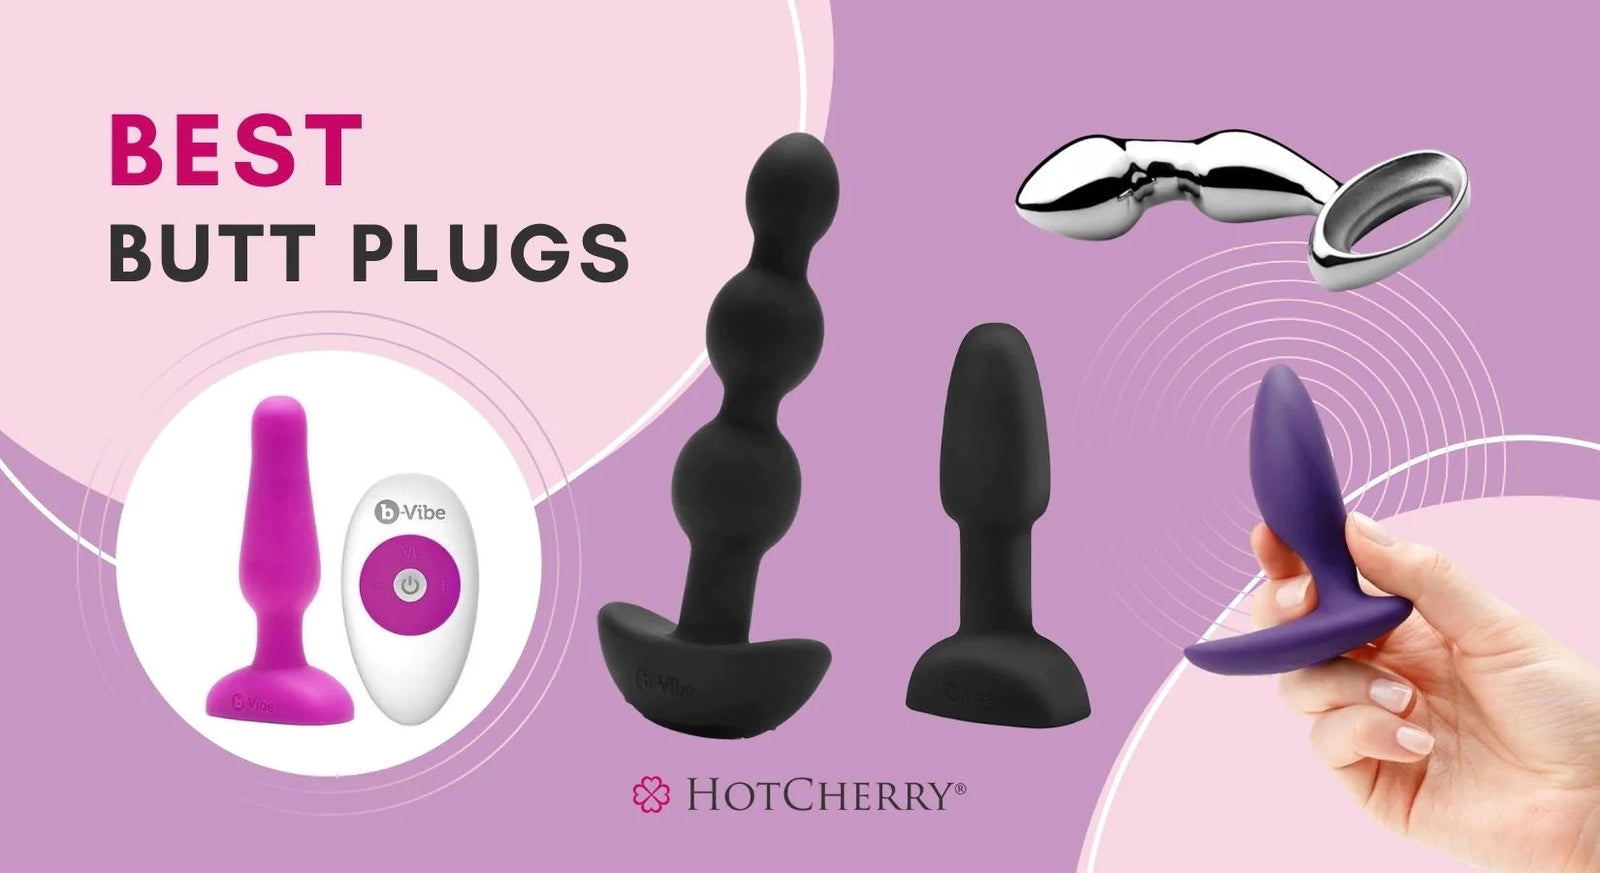 Best Butt Plugs for Extra Backdoor Action